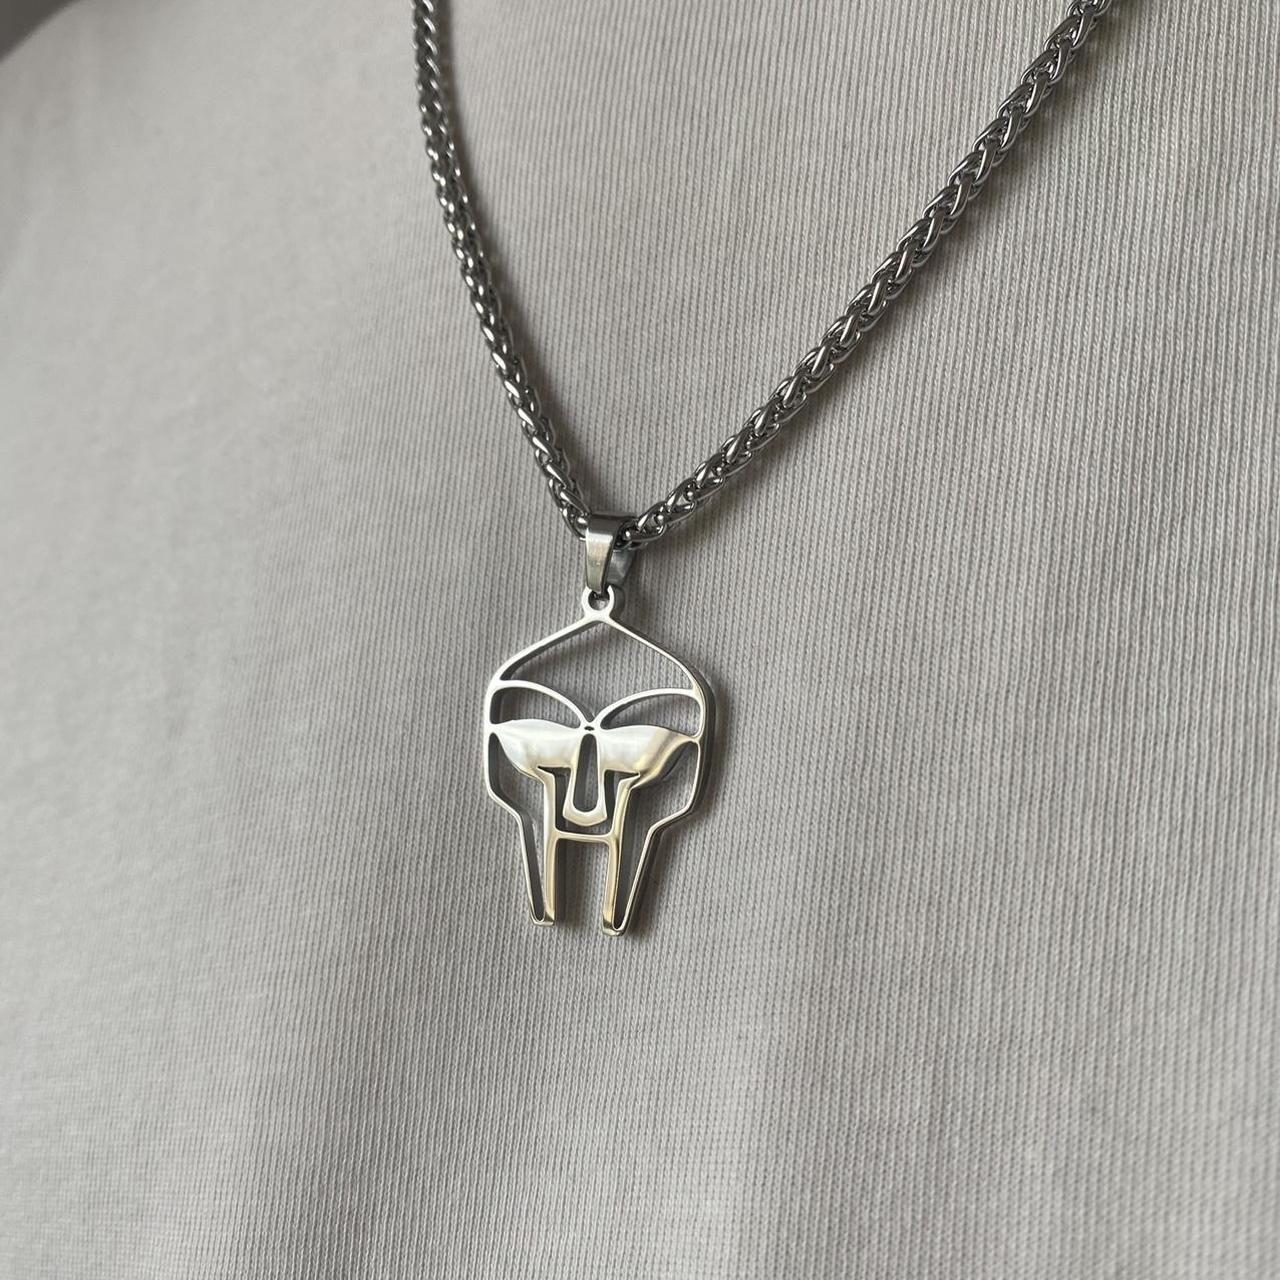 New Vintage Mf Doom Mask Pendant Necklace For Men Women Stainless Steel  Punk Fashion Egyptian Amulet Jewelry Gifts Dropshipping - AliExpress